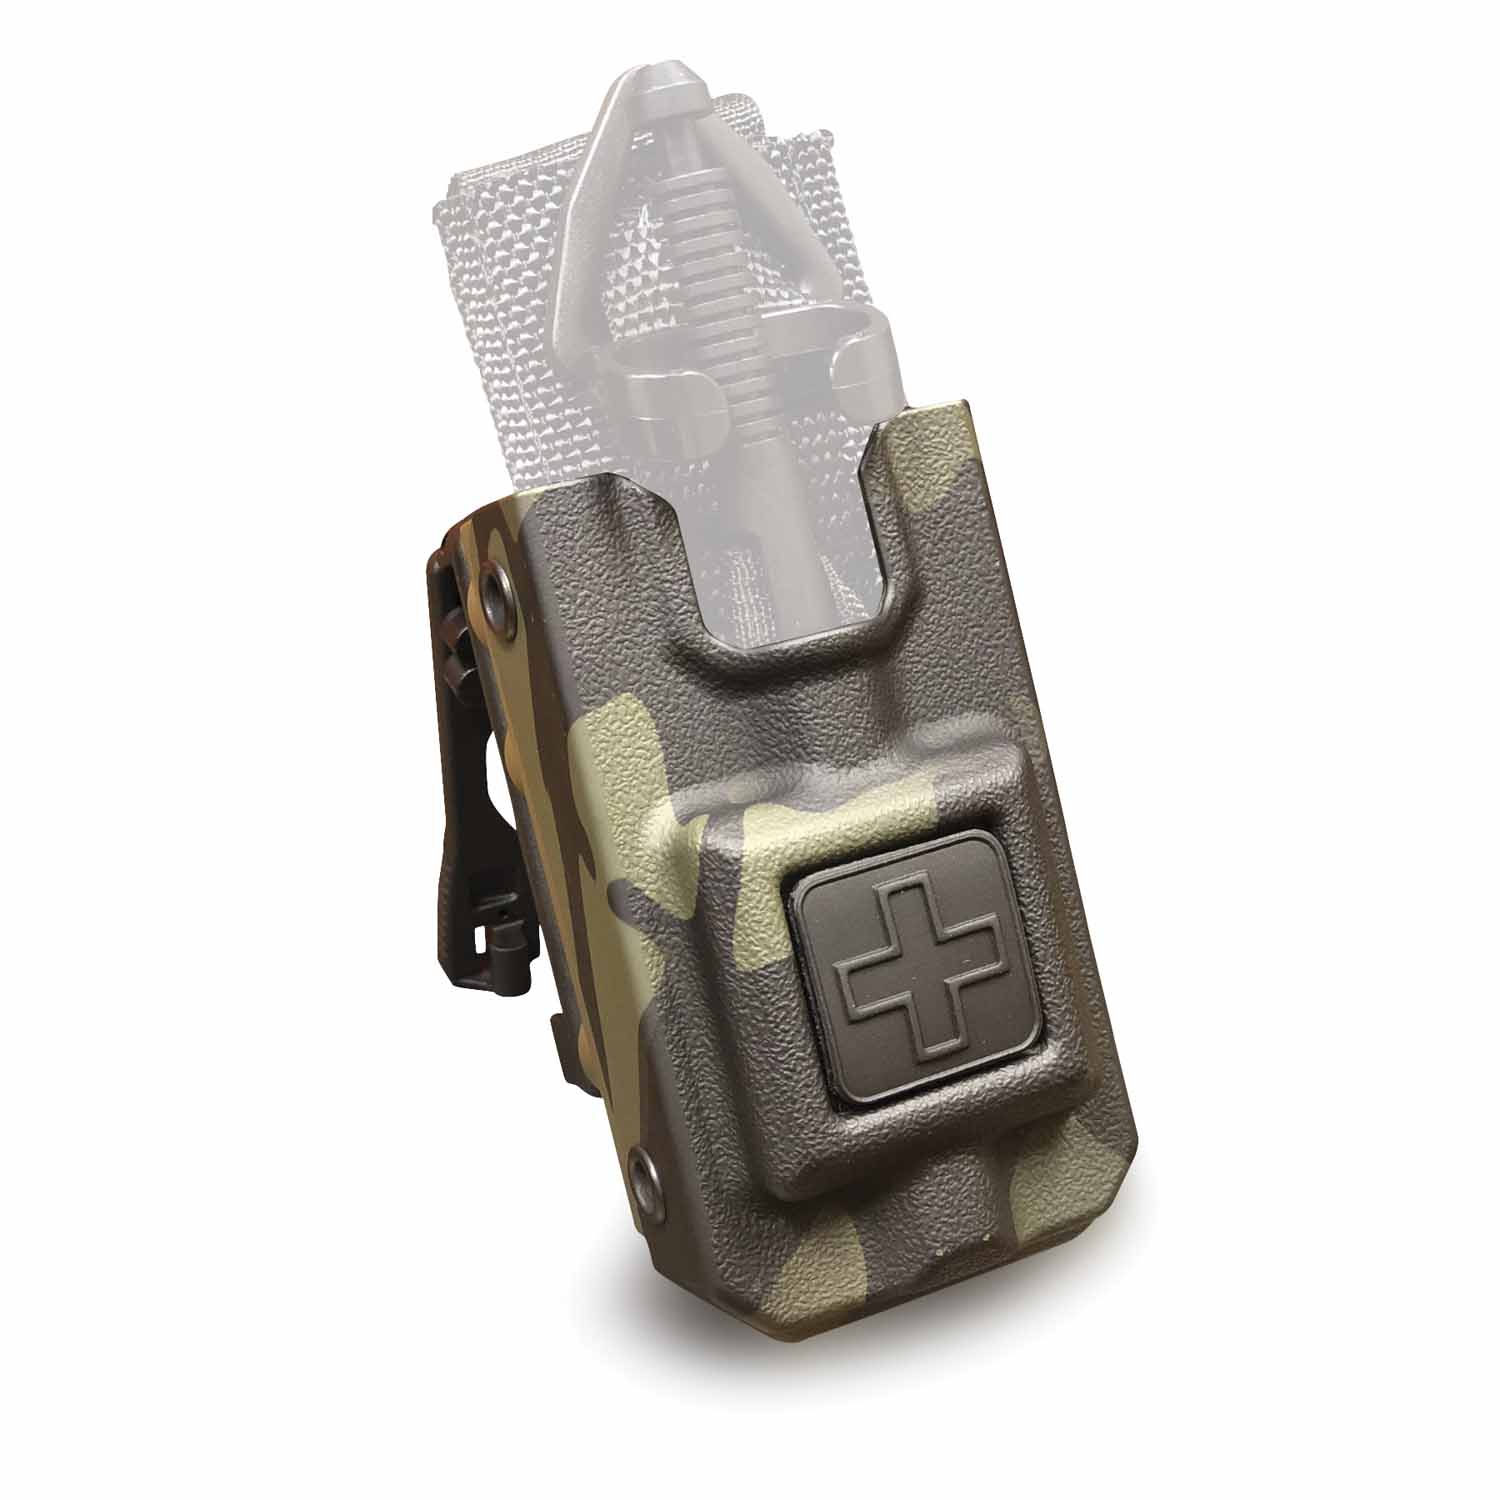 Eleven 10 Rigid TQ Case for SOFT with MOLLE Mount